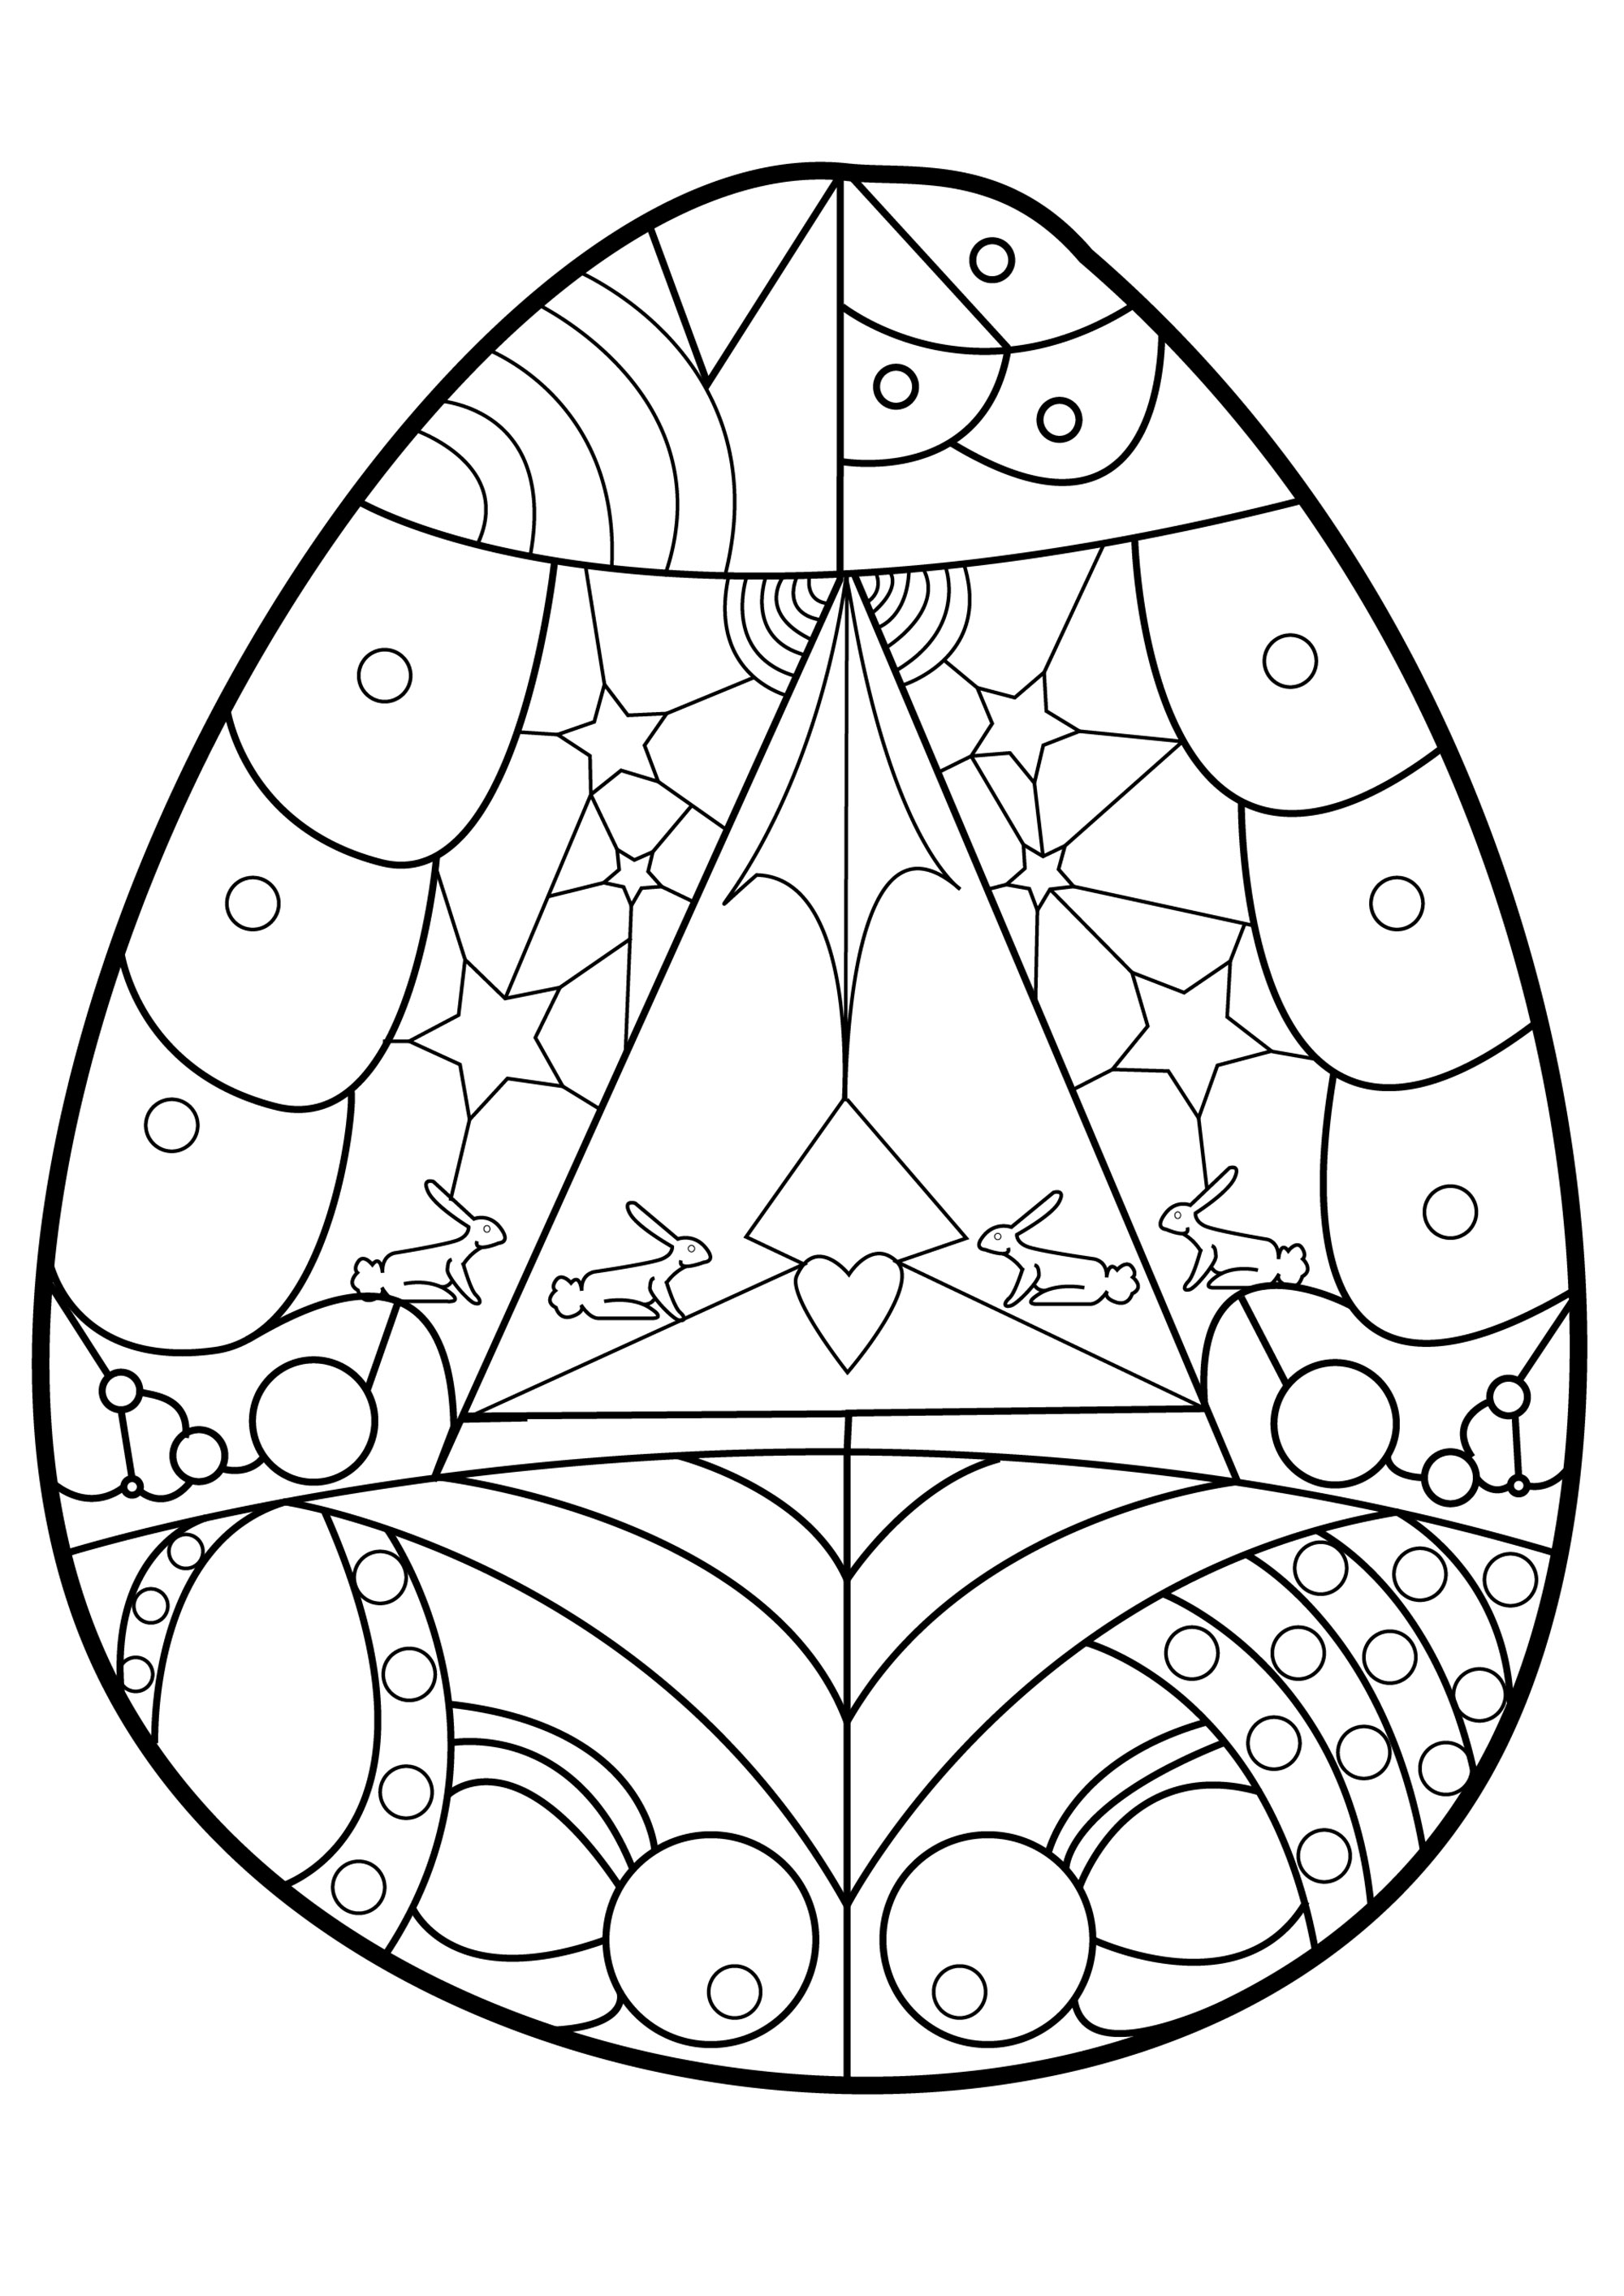 Easter egg with geometric shapes - Easter Kids Coloring Pages